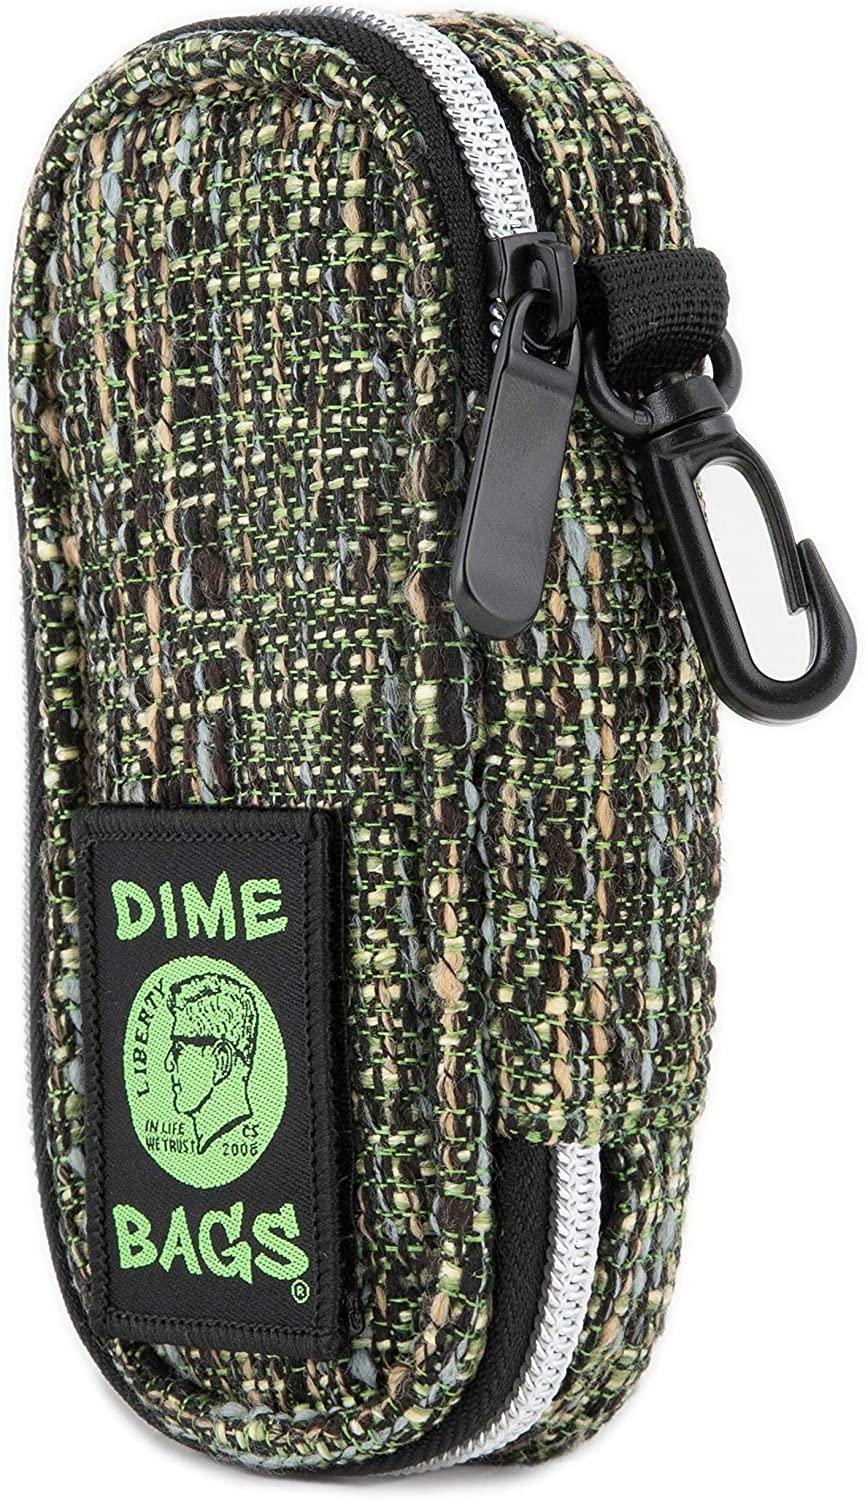 Dime Bags Pod Padded Travel Case with Key Chain Clip  Protective Hemp  Pouch with Padded Interior (5 Inch, Timber) Timber 5 Inch (Pack of 1)